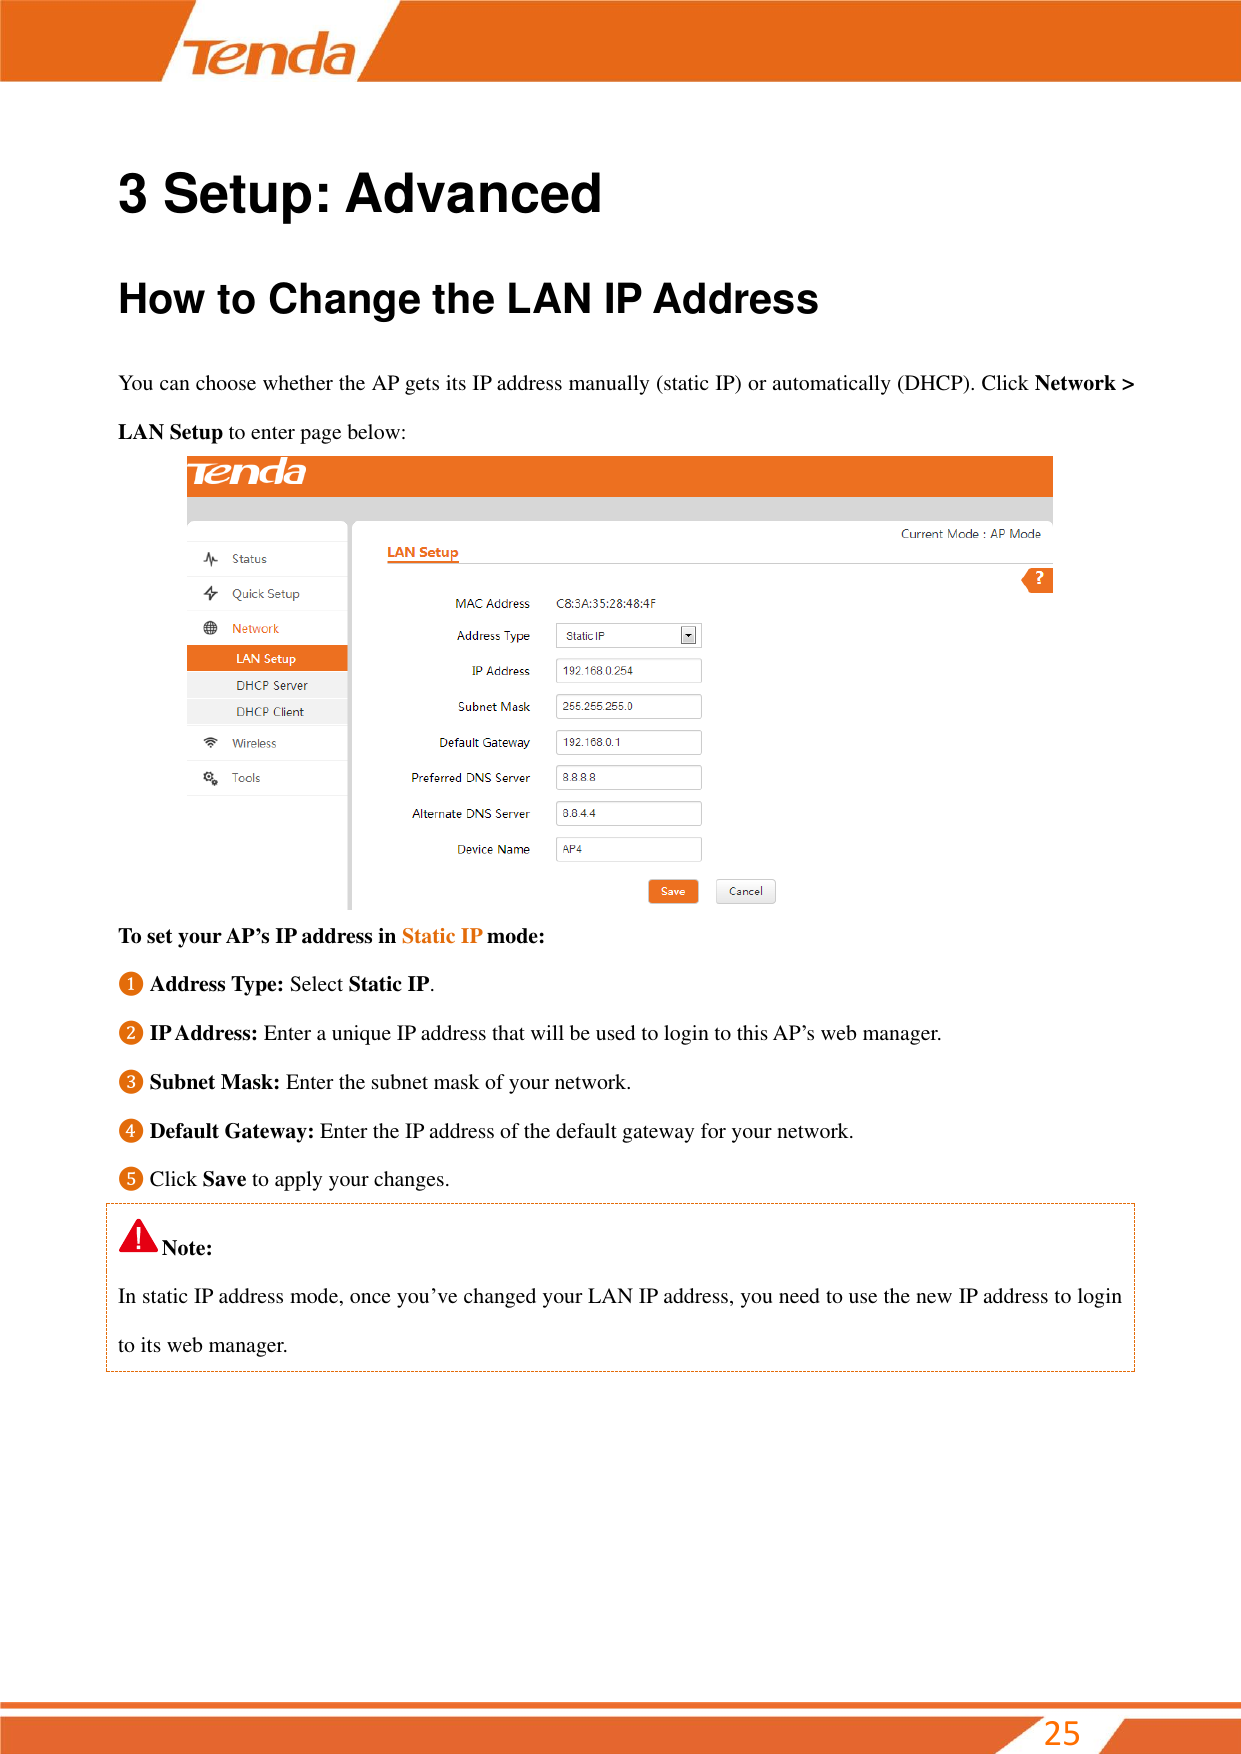         25 3 Setup: Advanced How to Change the LAN IP Address You can choose whether the AP gets its IP address manually (static IP) or automatically (DHCP). Click Network &gt; LAN Setup to enter page below:  To set your AP’s IP address in Static IP mode: ❶ Address Type: Select Static IP. ❷ IP Address: Enter a unique IP address that will be used to login to this AP’s web manager. ❸ Subnet Mask: Enter the subnet mask of your network. ❹ Default Gateway: Enter the IP address of the default gateway for your network.   ❺ Click Save to apply your changes. Note: In static IP address mode, once you’ve changed your LAN IP address, you need to use the new IP address to login to its web manager. 